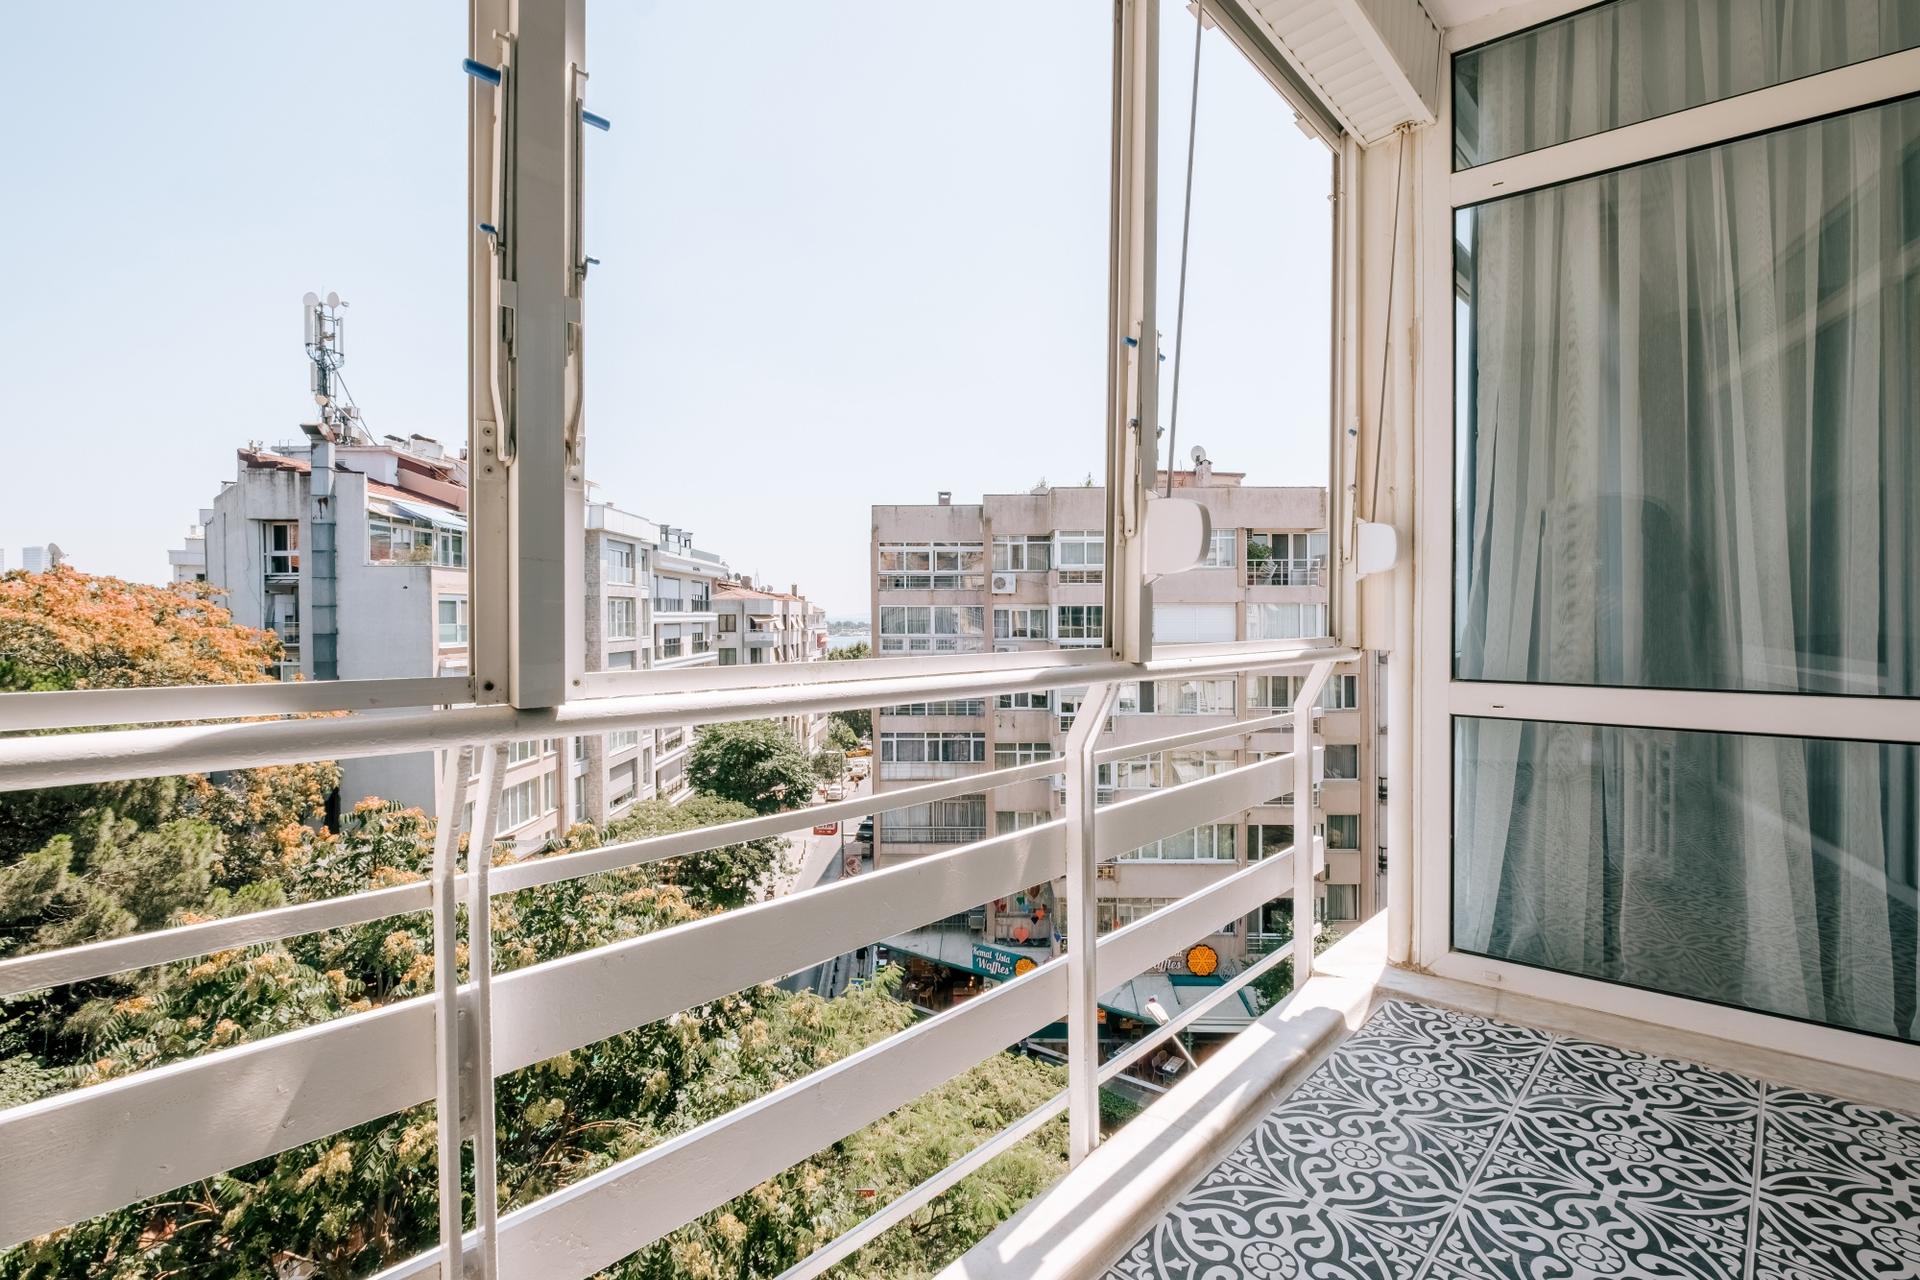 You can relax and unwind from the day's fatigue on the wonderful balcony of the house.